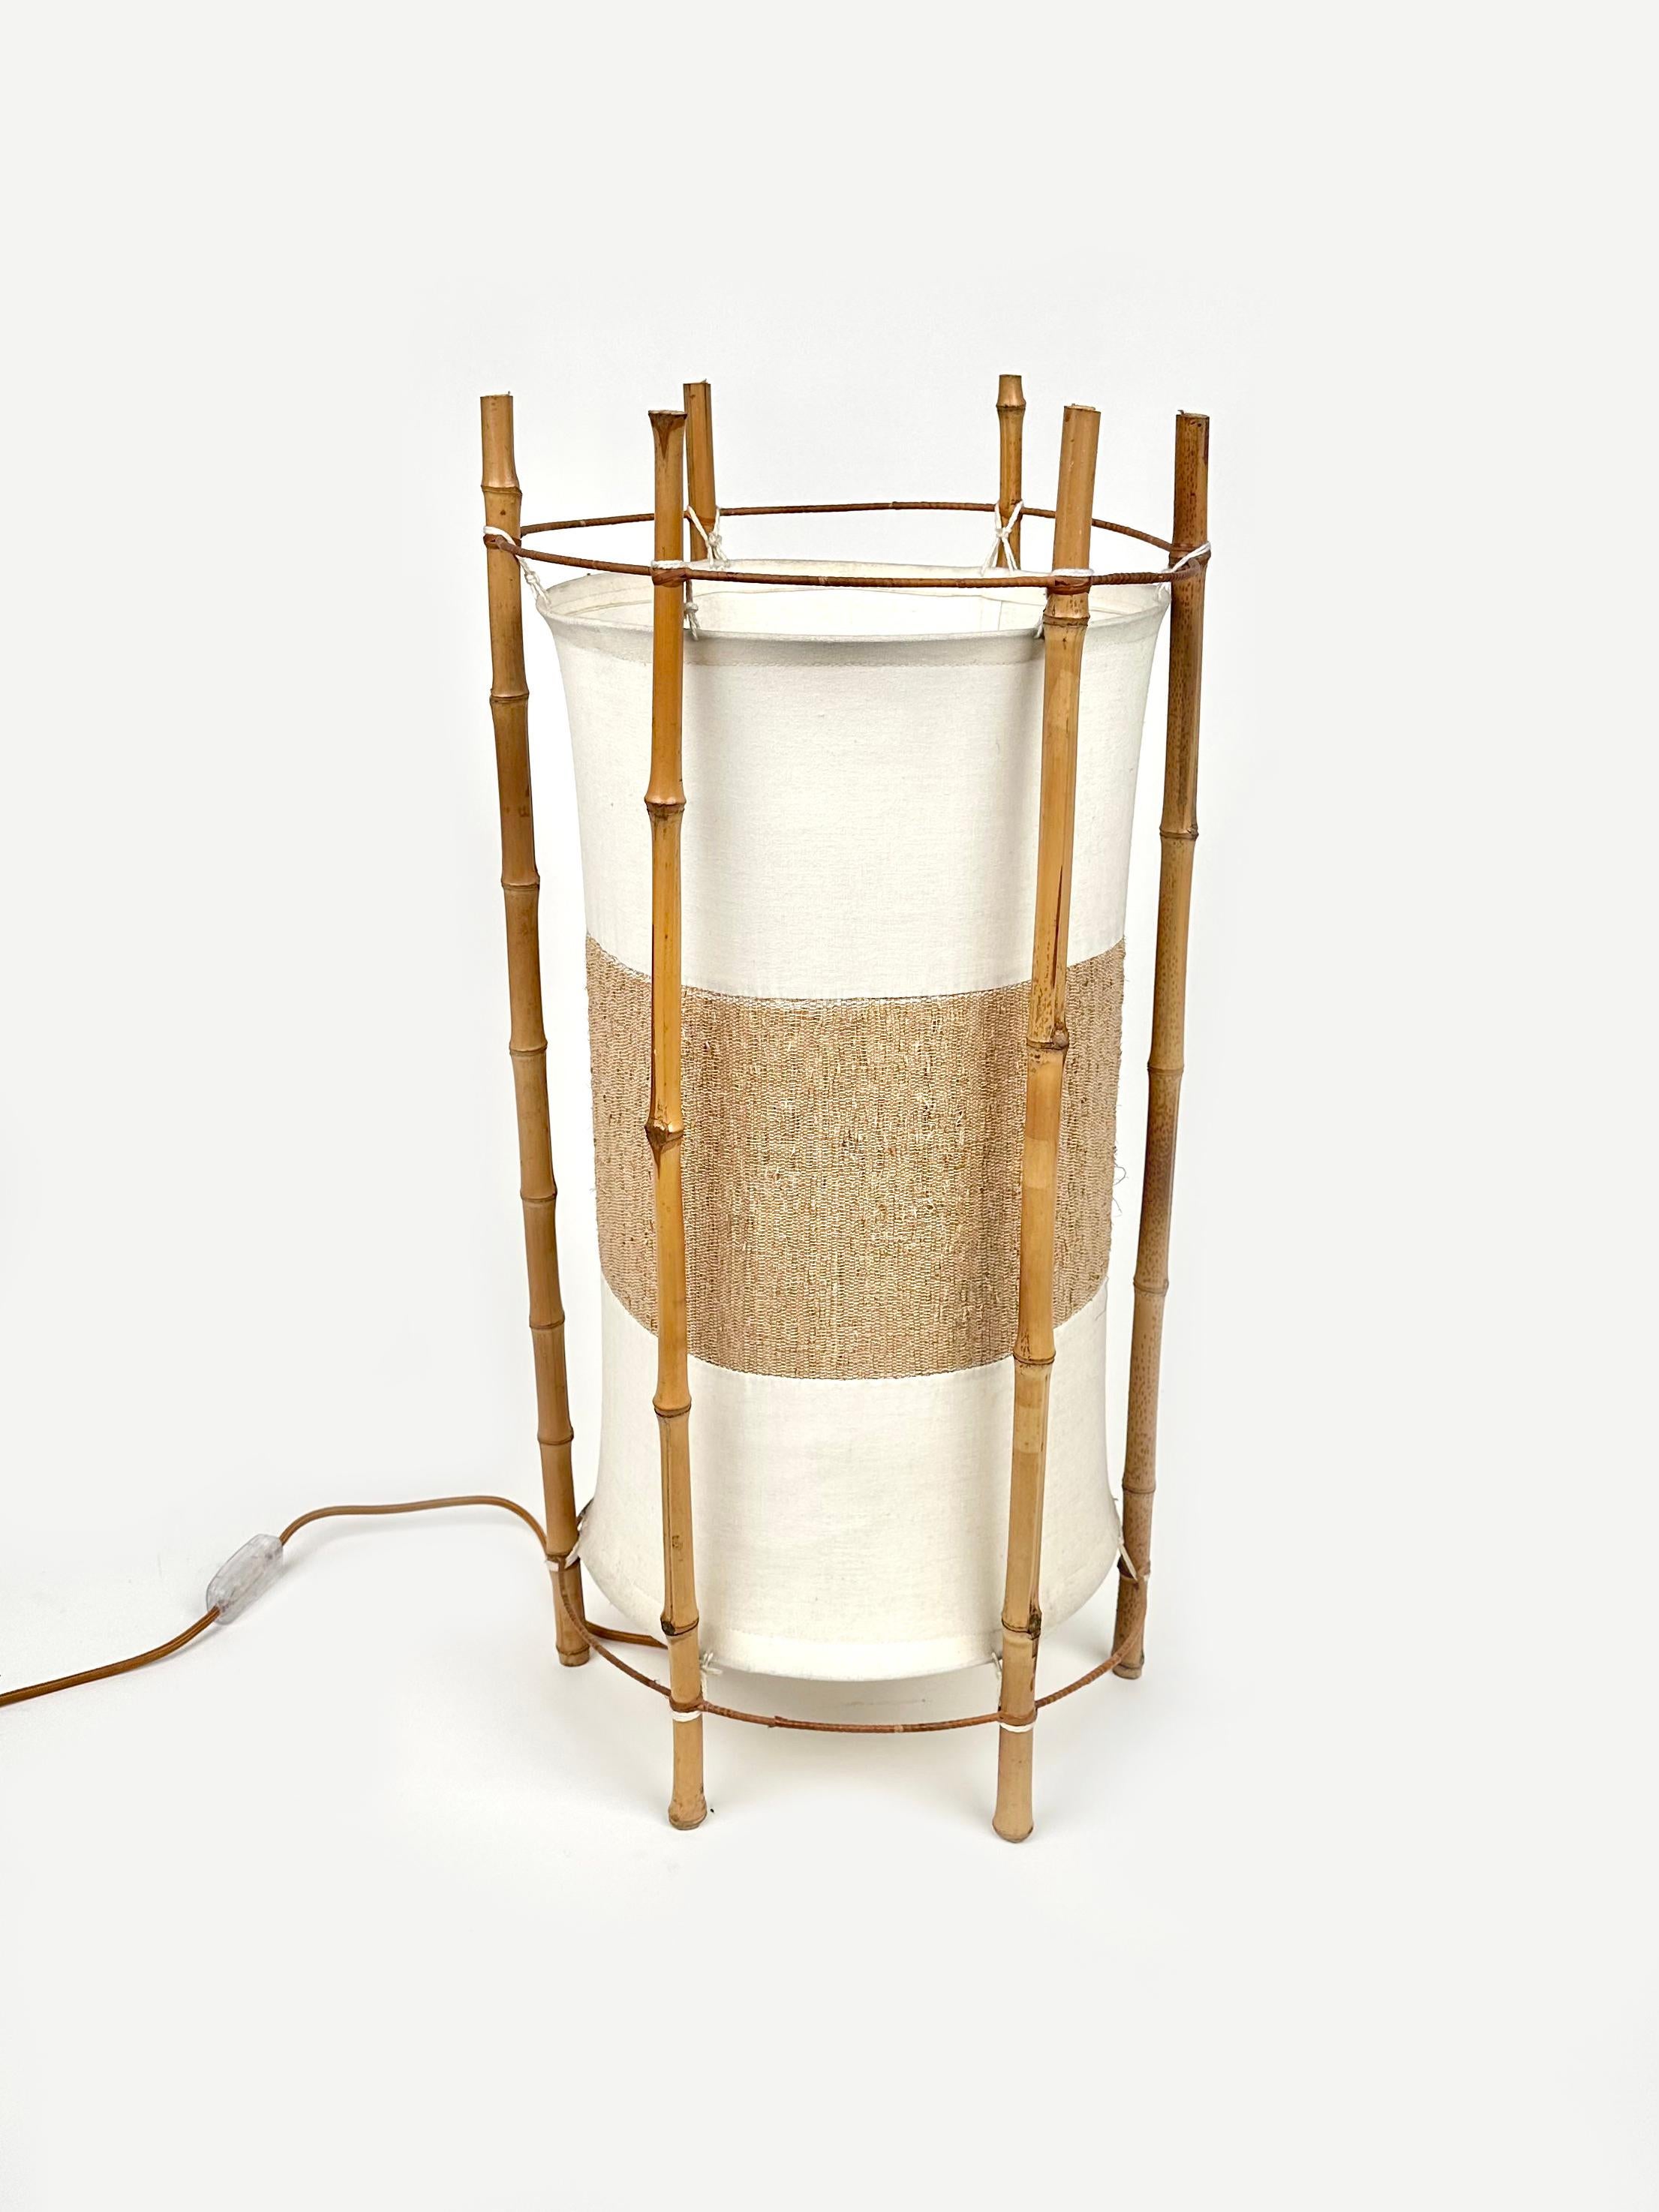 Amazing cylindrical floor lamp or table lamp in white and brown cotton featuring structure in bamboo composed of six stems in the style of to the French designer Louis Sognot. 

Made in Italy in the 1960s.

Electrical system has been renewed.